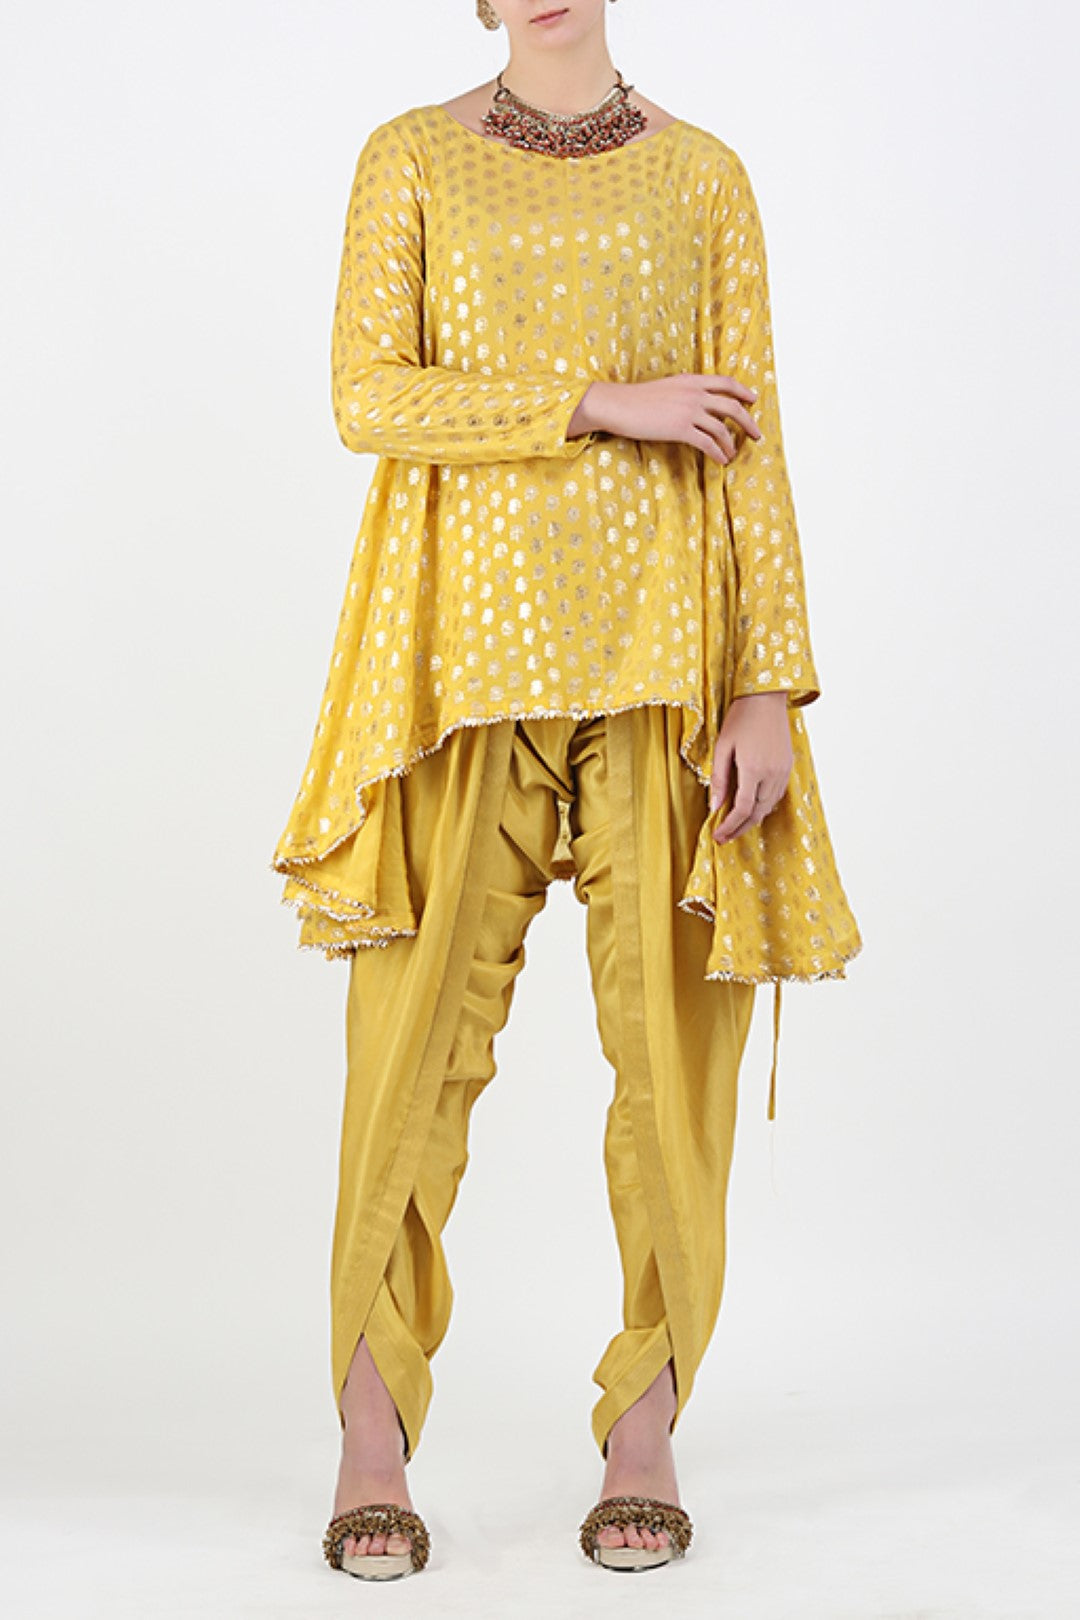 PITAMBARI YELLOW GOLD FOIL PRINTED ASYMMETRICAL TUNIC WITH FRONT OVERLAP DHOTI